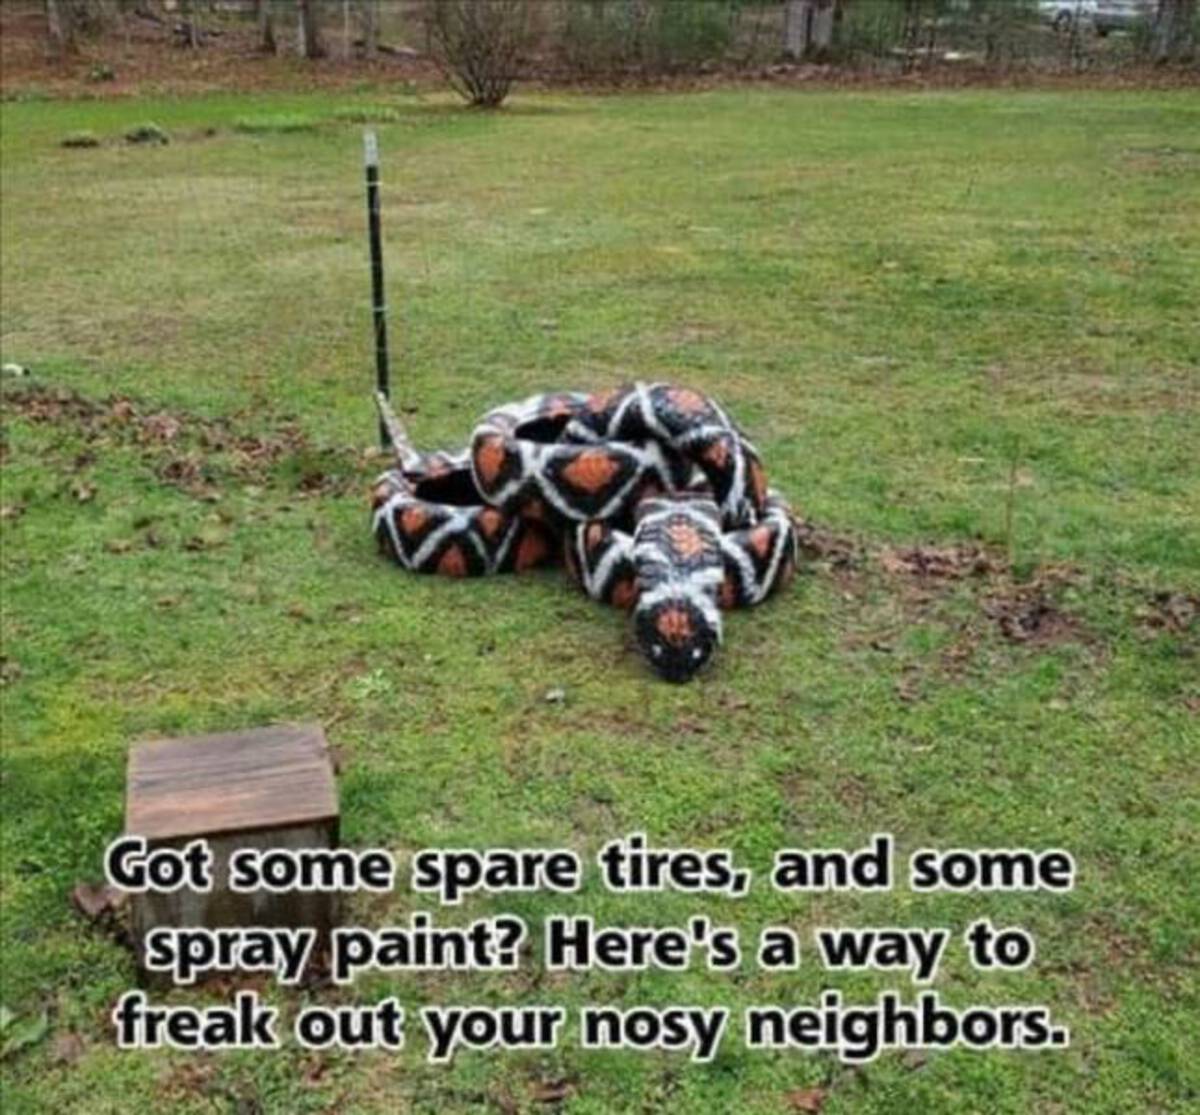 grass - Got some spare tires, and some spray paint? Here's a way to freak out your nosy neighbors.